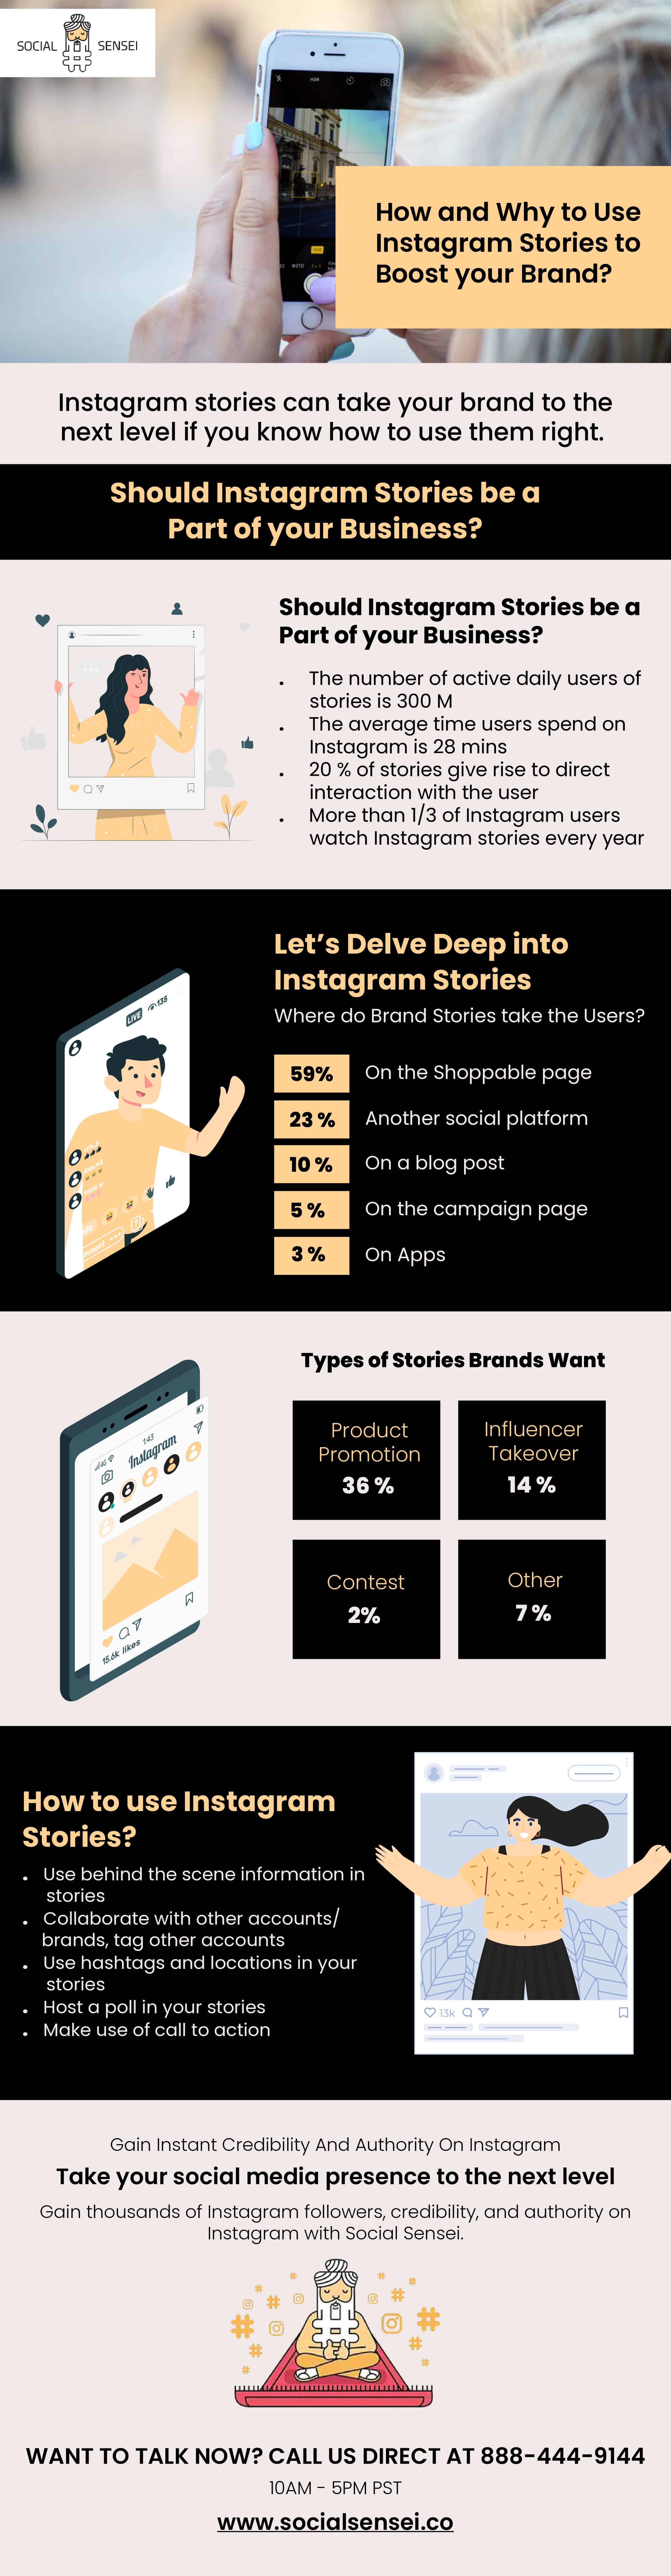 How and Why to Use Instagram Stories to Boost your Brand?